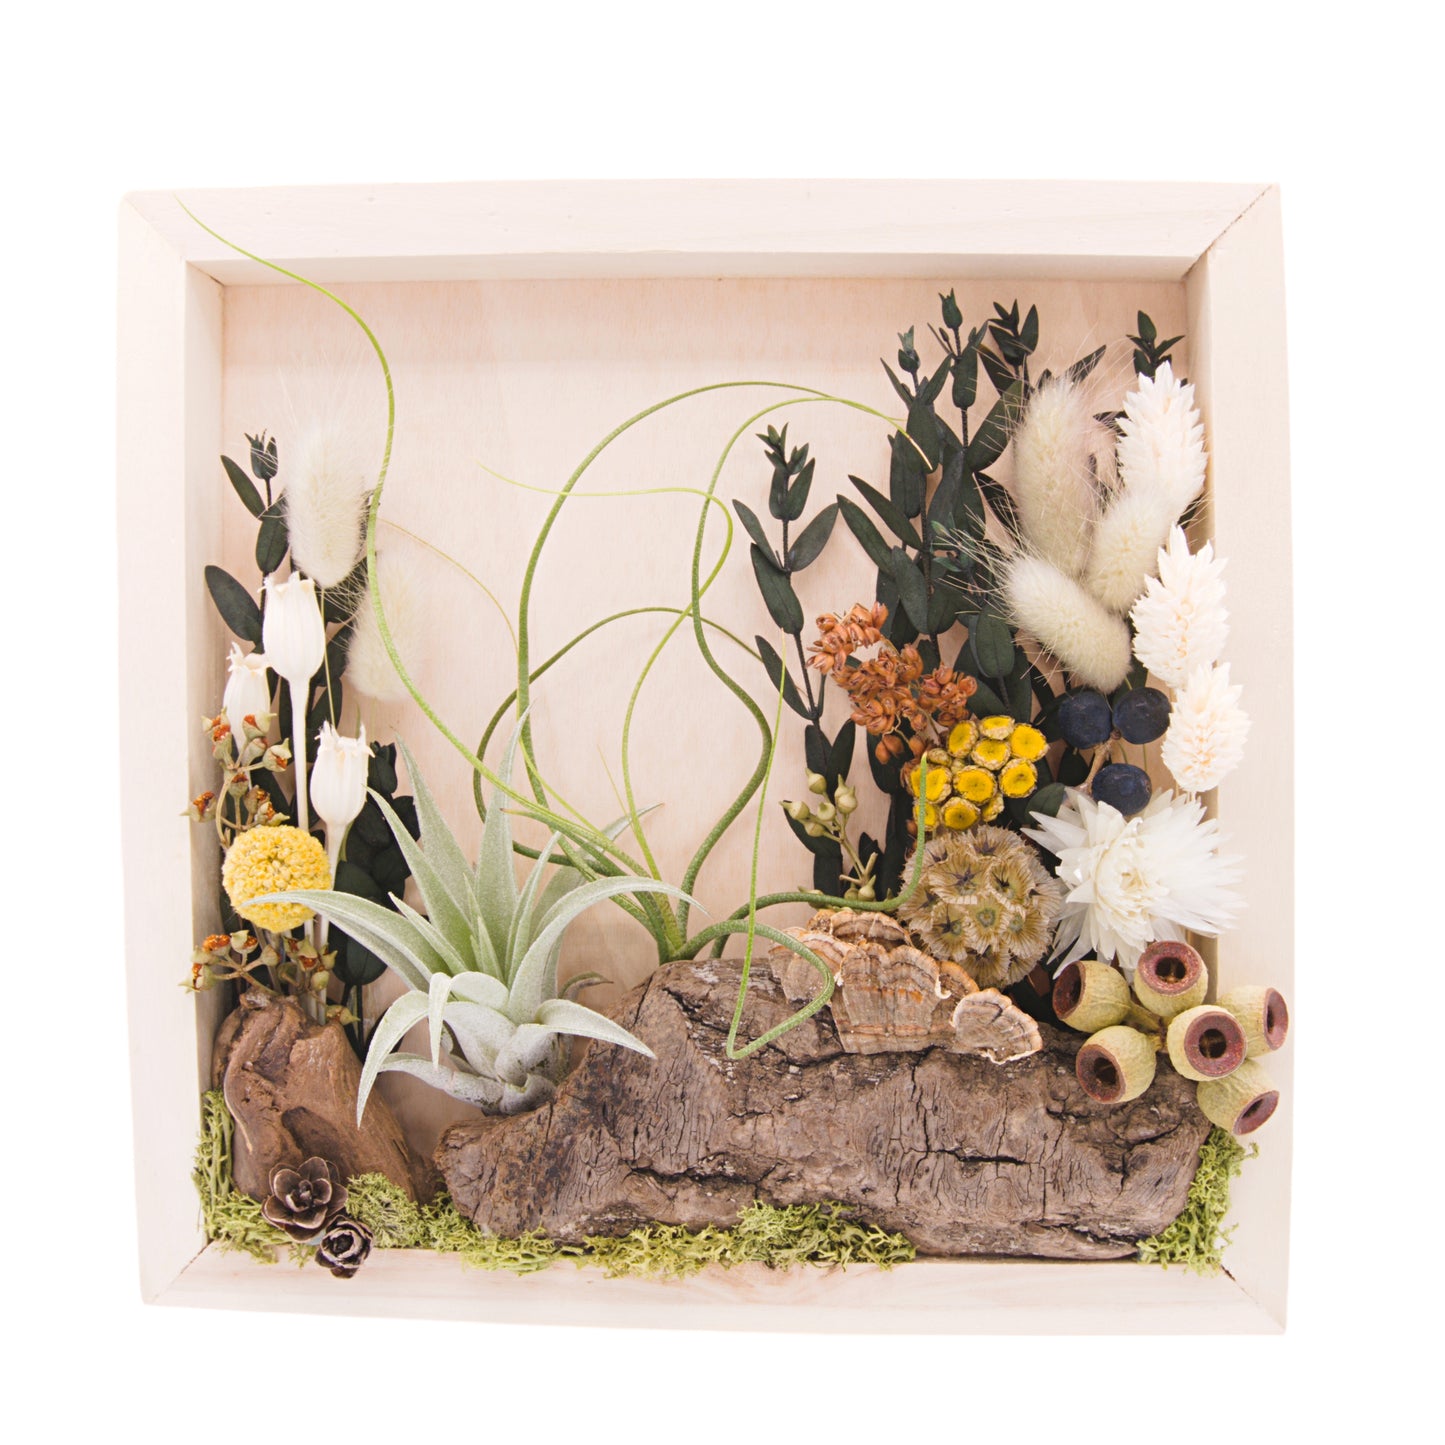 Wooden square box frame filled with dried flowers, wood, moss and two airplants or tillandsias